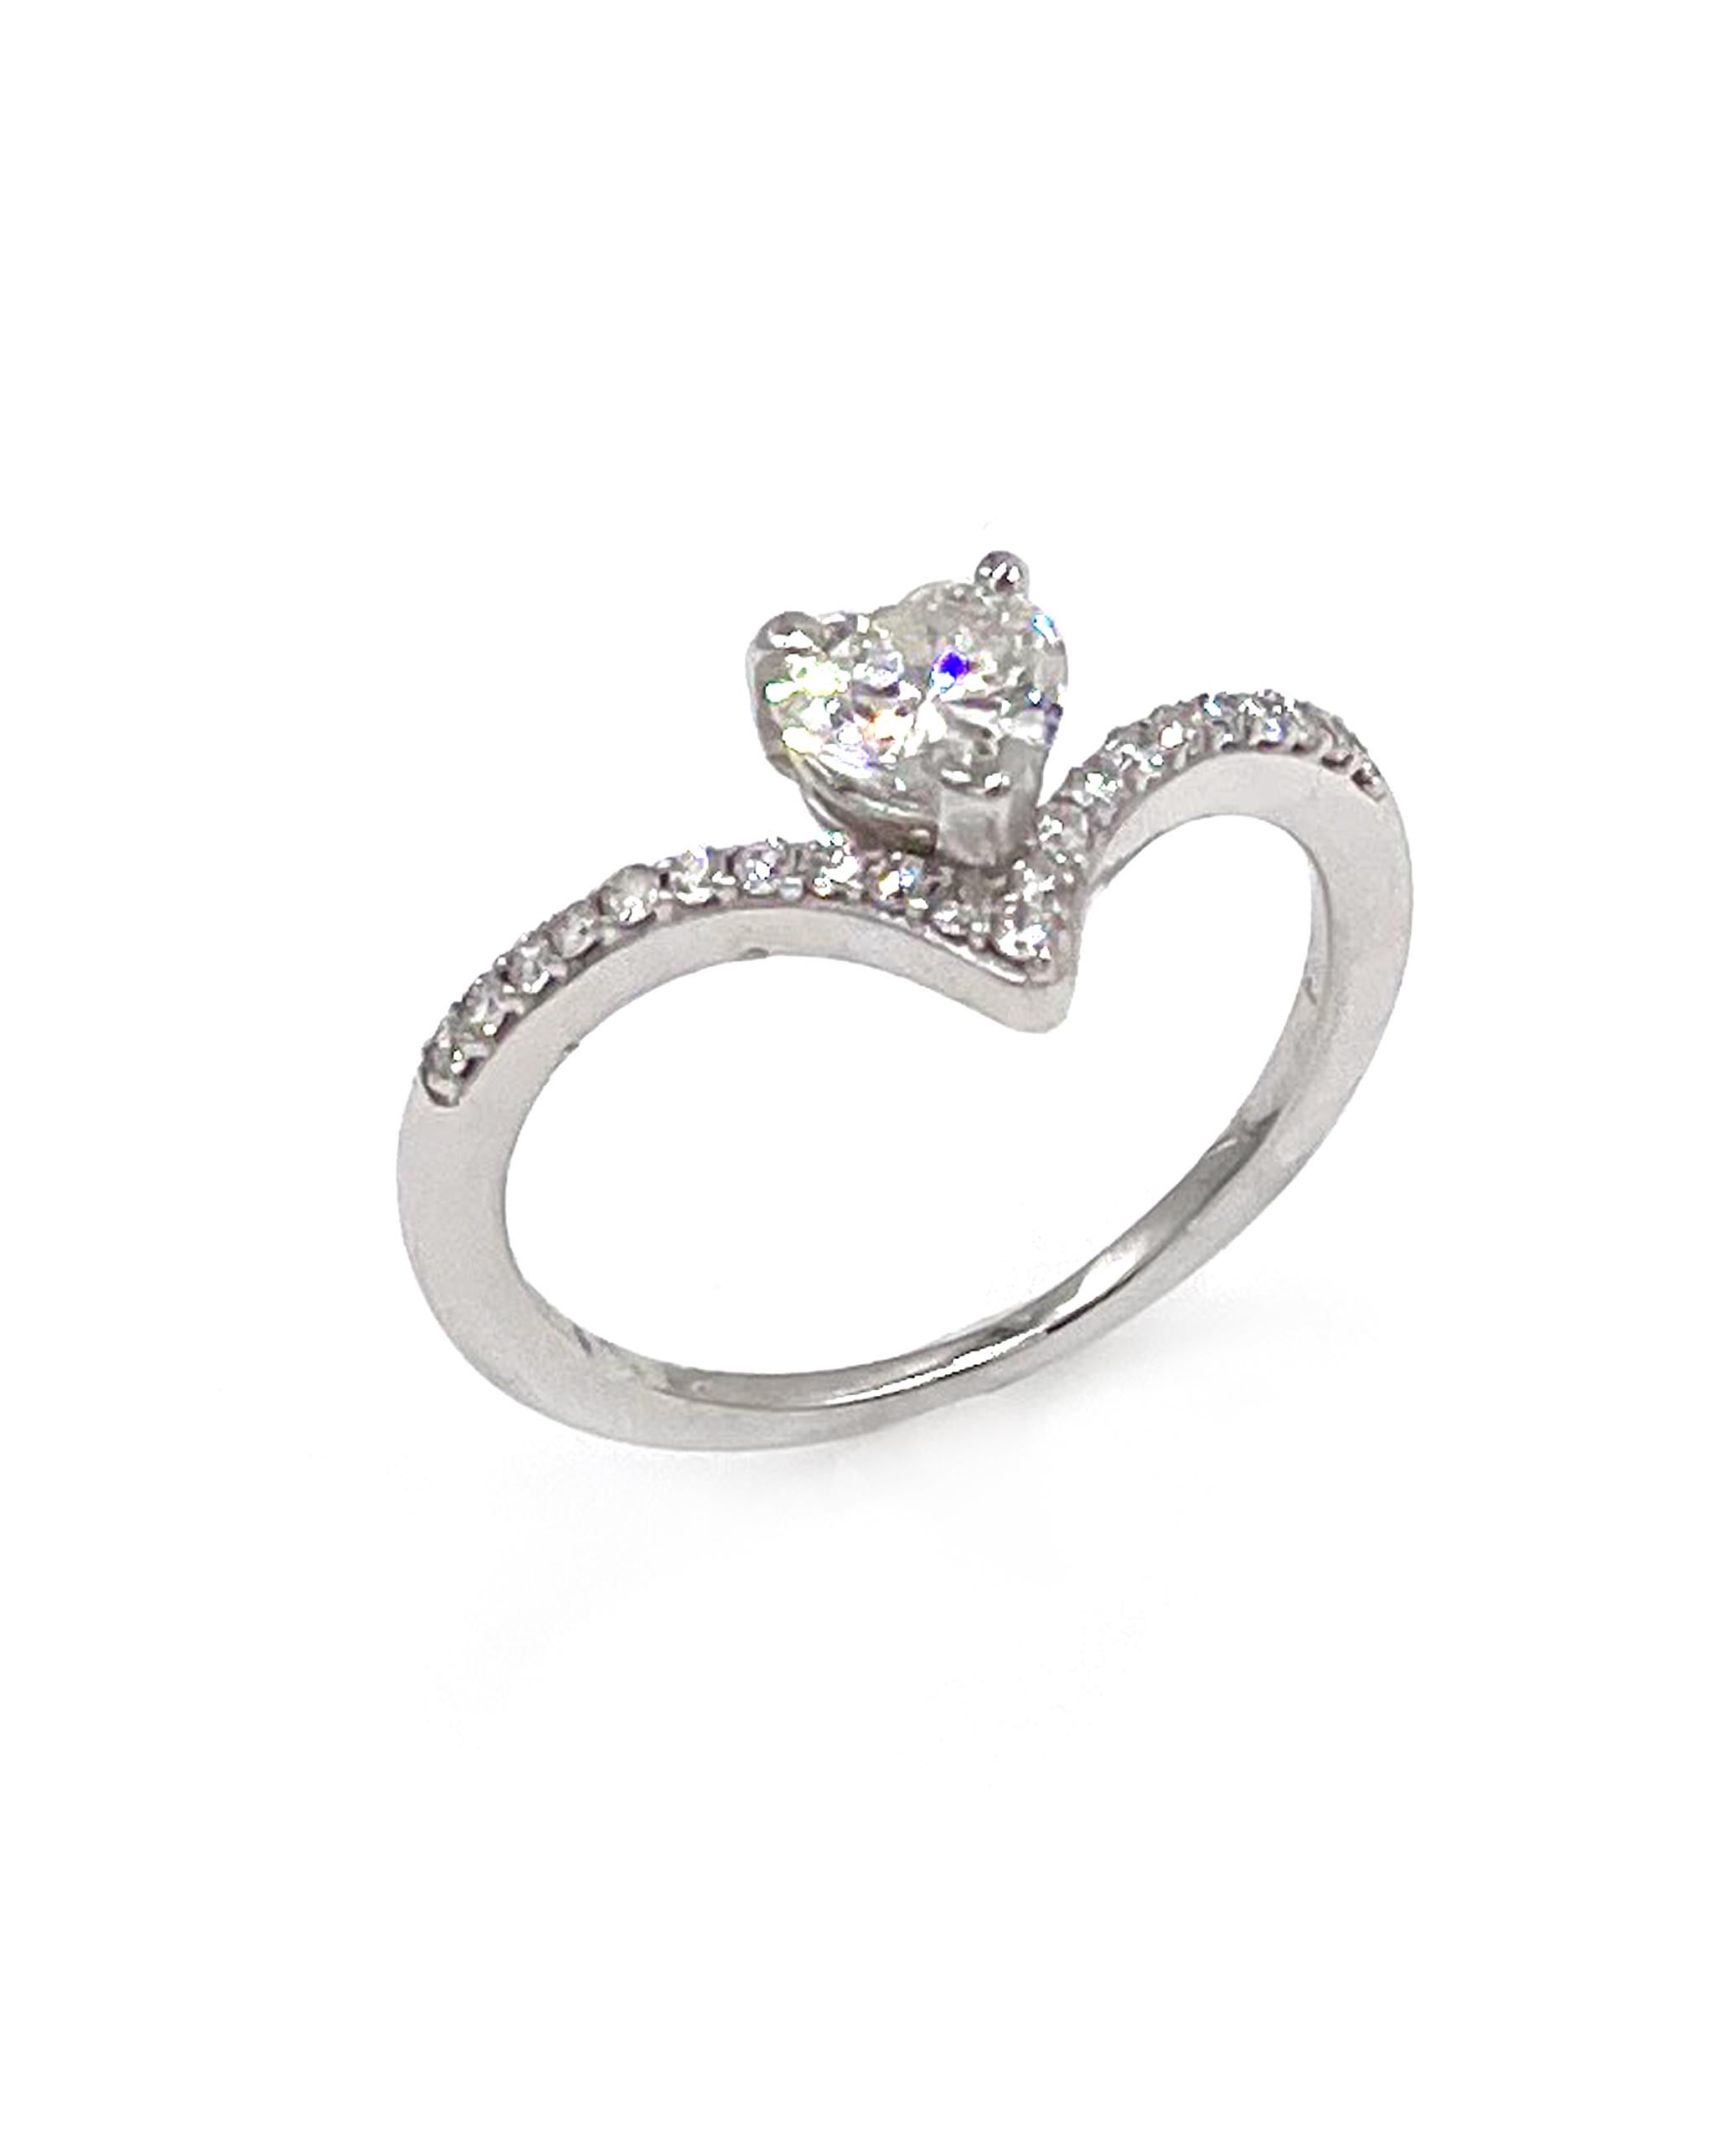 14K white gold v-shape ring with 0.15 carat round diamonds and 0.47 carat heart cut center diamond. H color, SI2 clarity.

* Finger size: 6